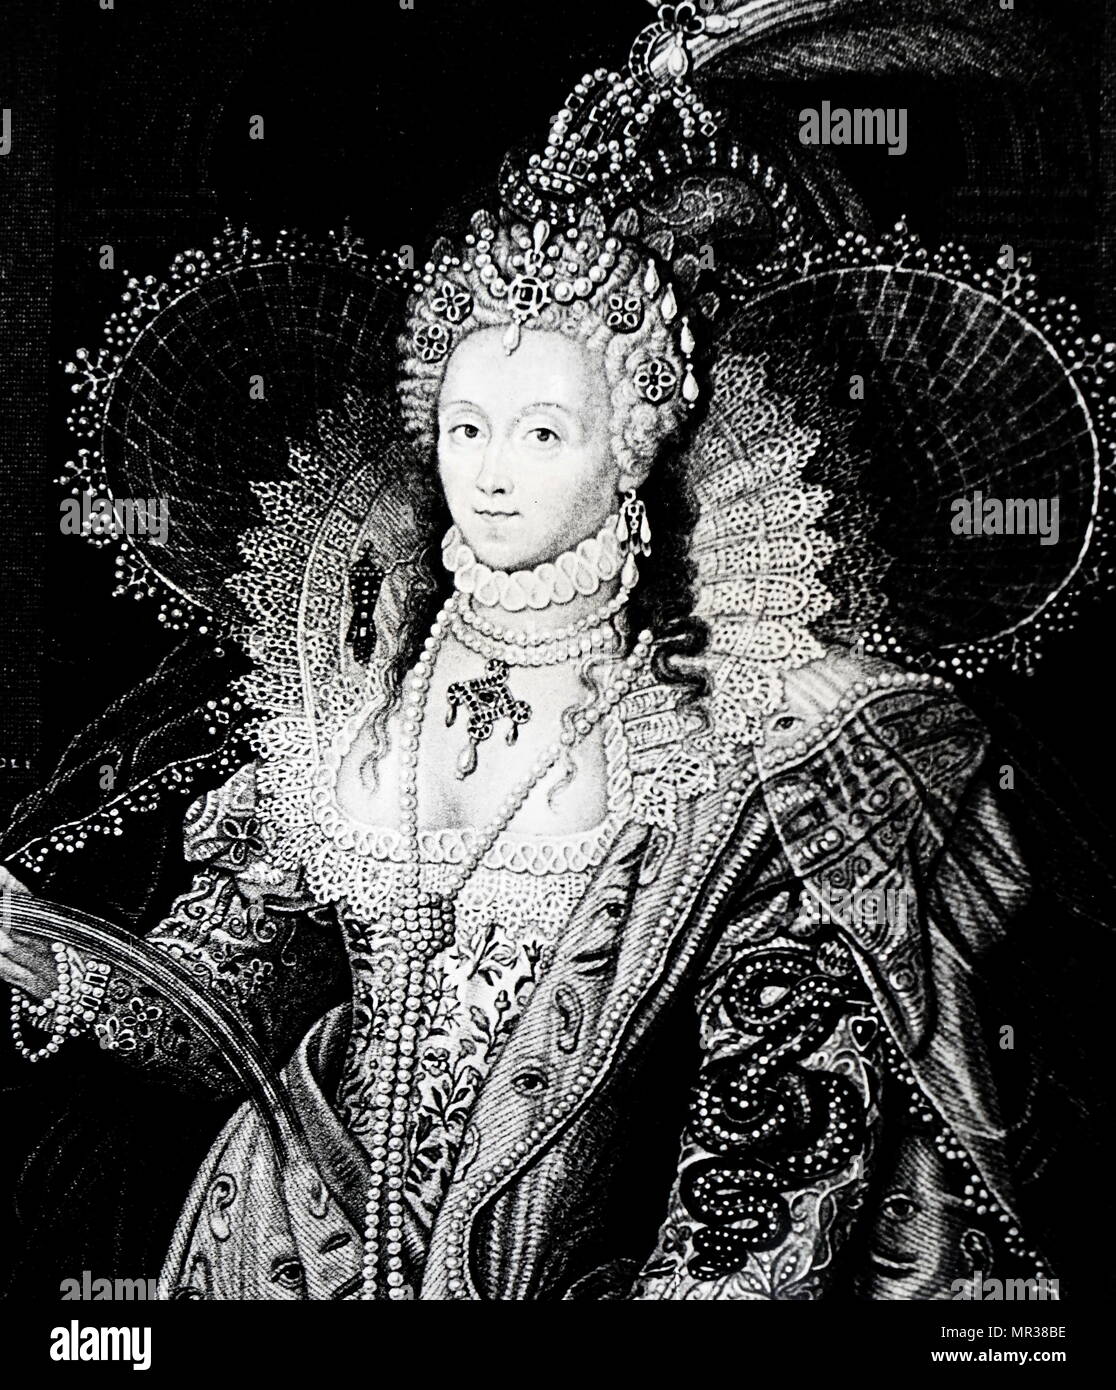 Engraved portrait of Queen Elizabeth I after the portrait by Federico Zuccari. Queen Elizabeth I (1533-1603) Queen of England and Ireland. Federico Zuccari (1540-1609) an Italian Mannerist painter and architect. Dated 19th century Stock Photo